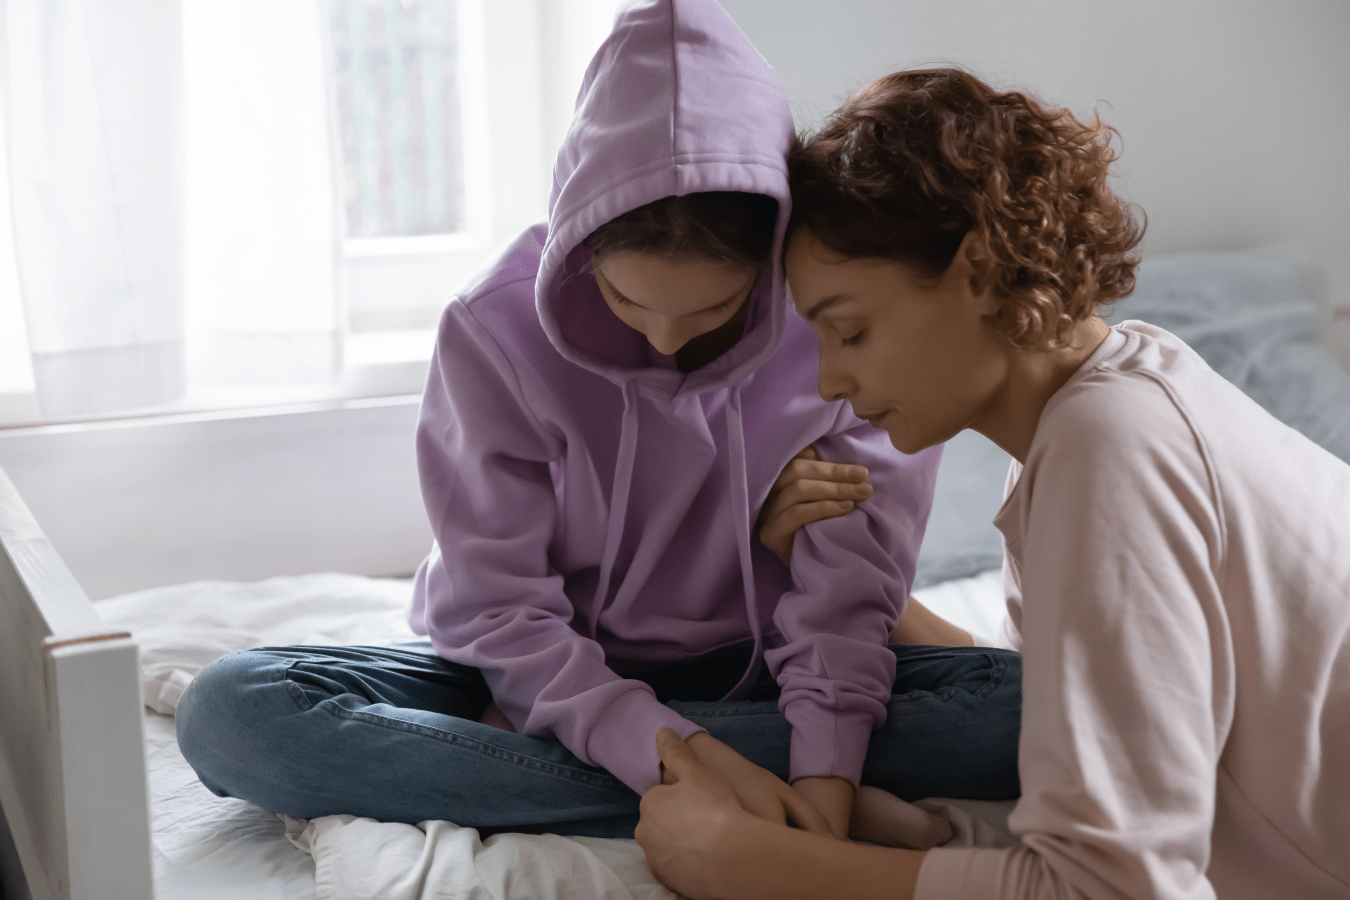 A mother consoles her daughter, who sits cross-legged in blue jeans and a purple sweater with her head down in a depressed state